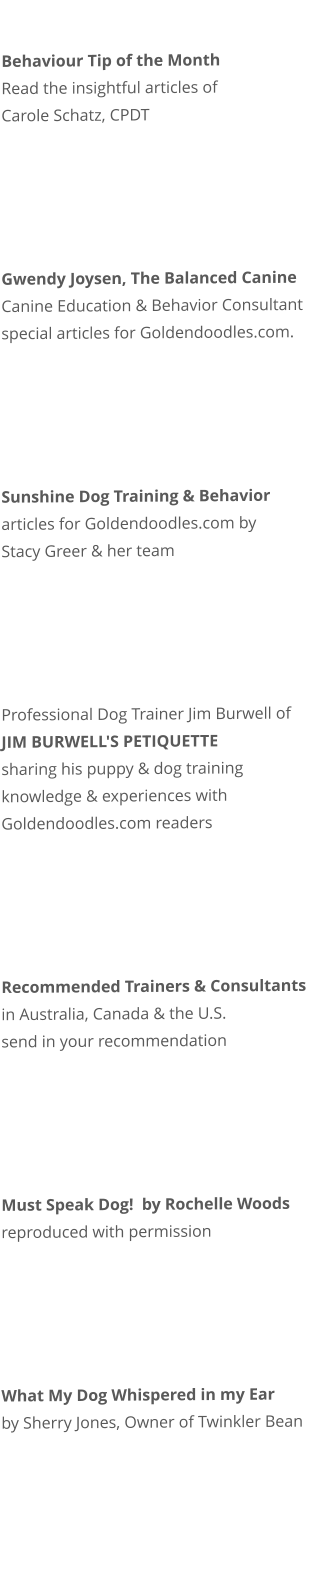 Behaviour Tip of the Month Read the insightful articles of   Carole Schatz, CPDT        Gwendy Joysen, The Balanced Canine Canine Education & Behavior Consultant special articles for Goldendoodles.com.      Sunshine Dog Training & Behavior articles for Goldendoodles.com by Stacy Greer & her team      Professional Dog Trainer Jim Burwell of JIM BURWELL'S PETIQUETTE sharing his puppy & dog training knowledge & experiences with Goldendoodles.com readers      Recommended Trainers & Consultants in Australia, Canada & the U.S. send in your recommendation      Must Speak Dog!  by Rochelle Woods reproduced with permission      What My Dog Whispered in my Ear by Sherry Jones, Owner of Twinkler Bean